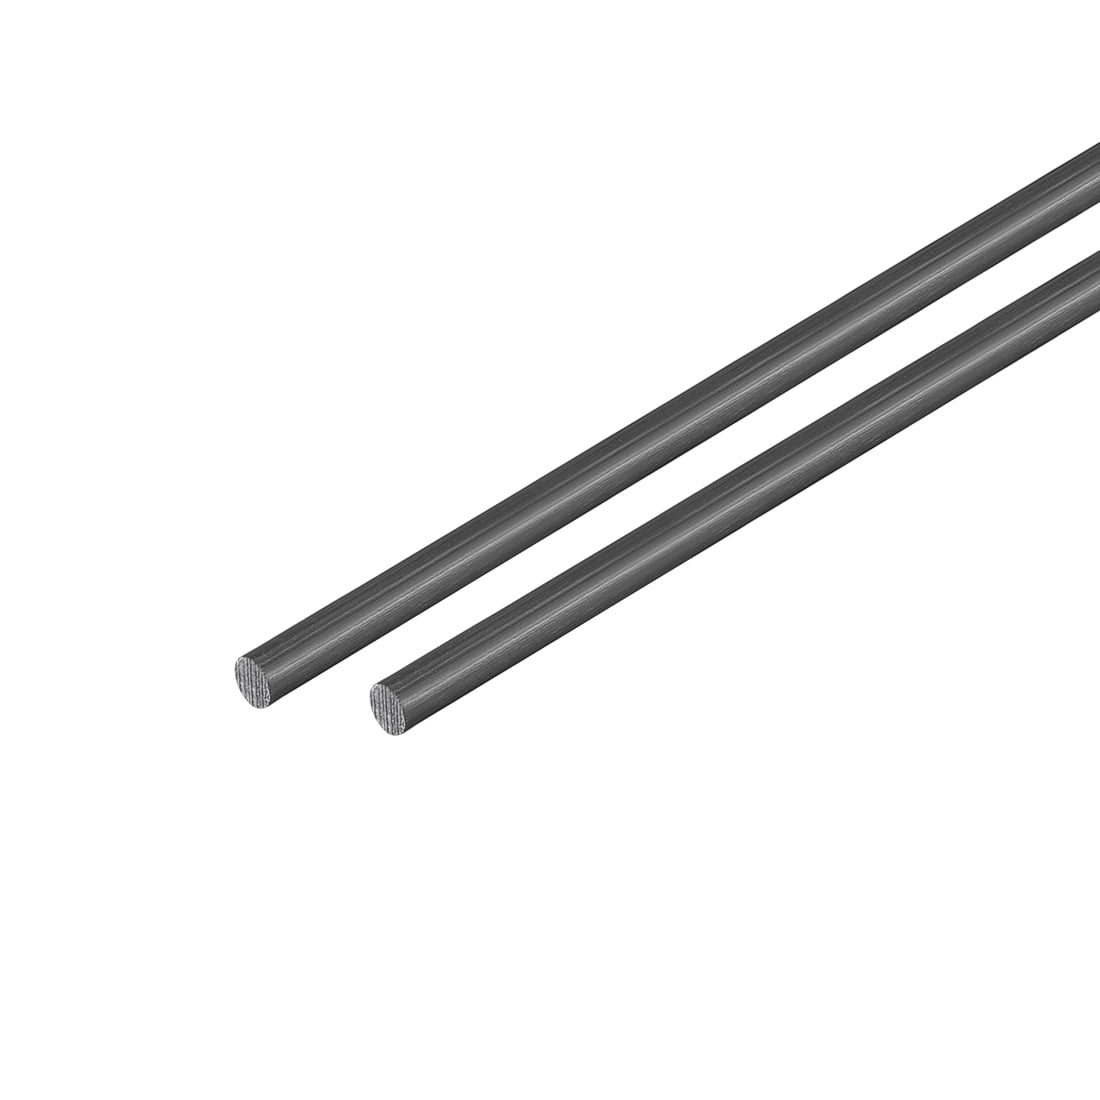 Details about   10 mm Diameter x 500mm Carbon Fiber Solid Rod Round Bar Pin For RC Airplane 